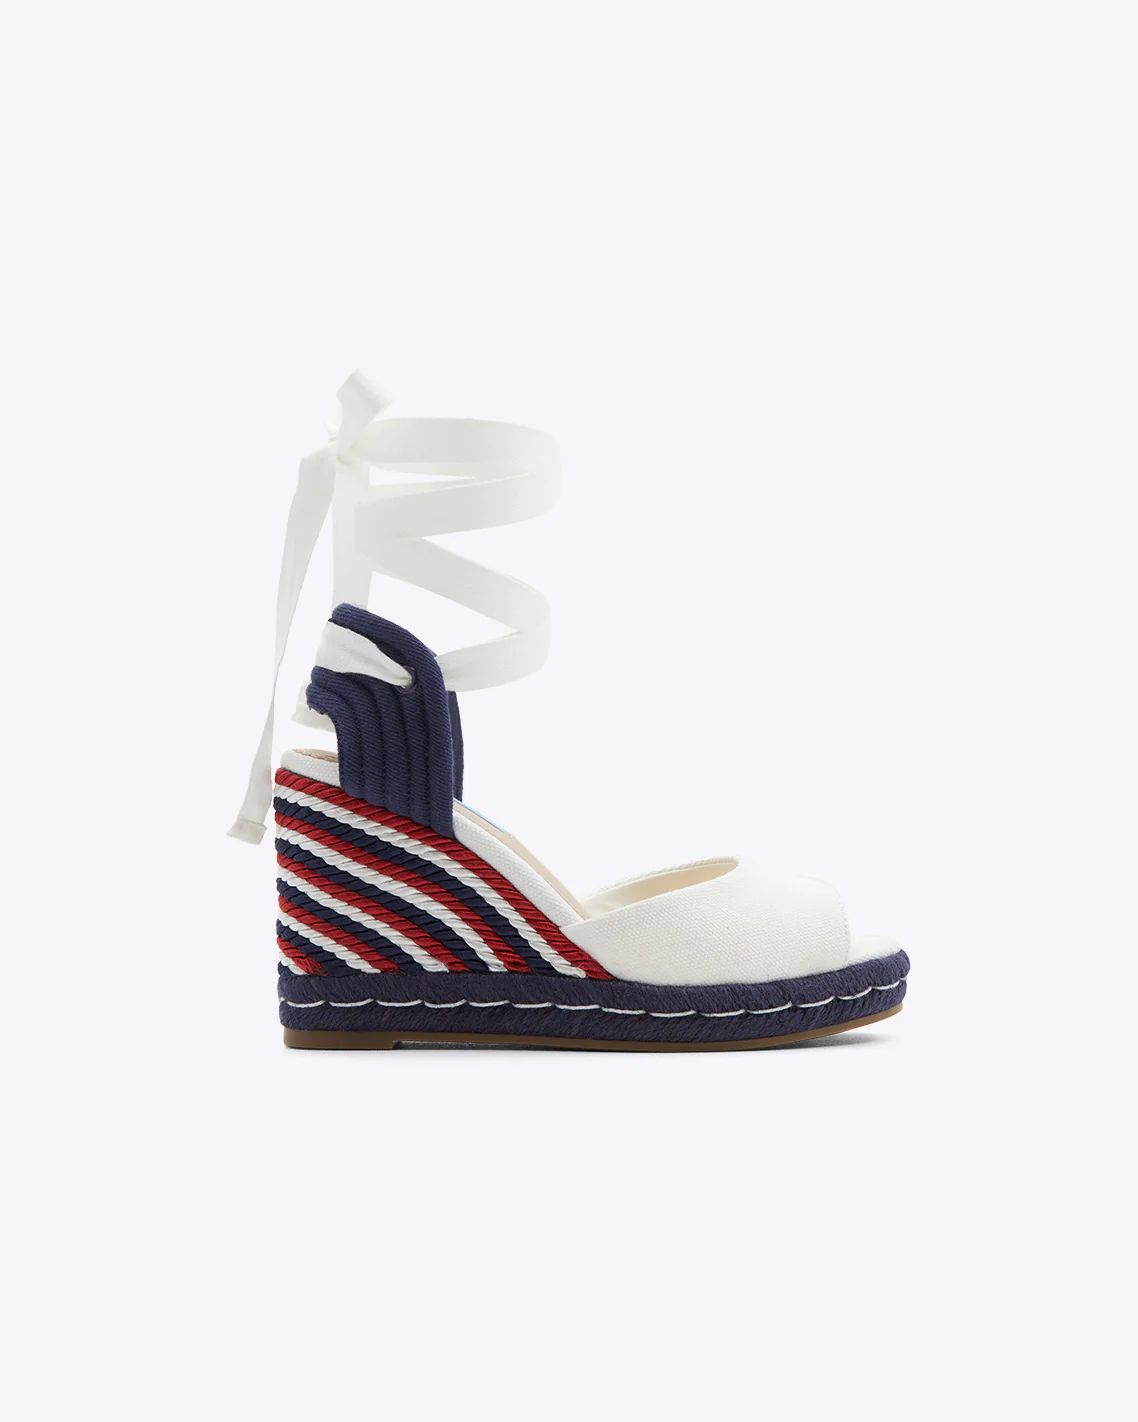 Ophelia Espadrilles in Red, White, and Blue | Draper James (US)